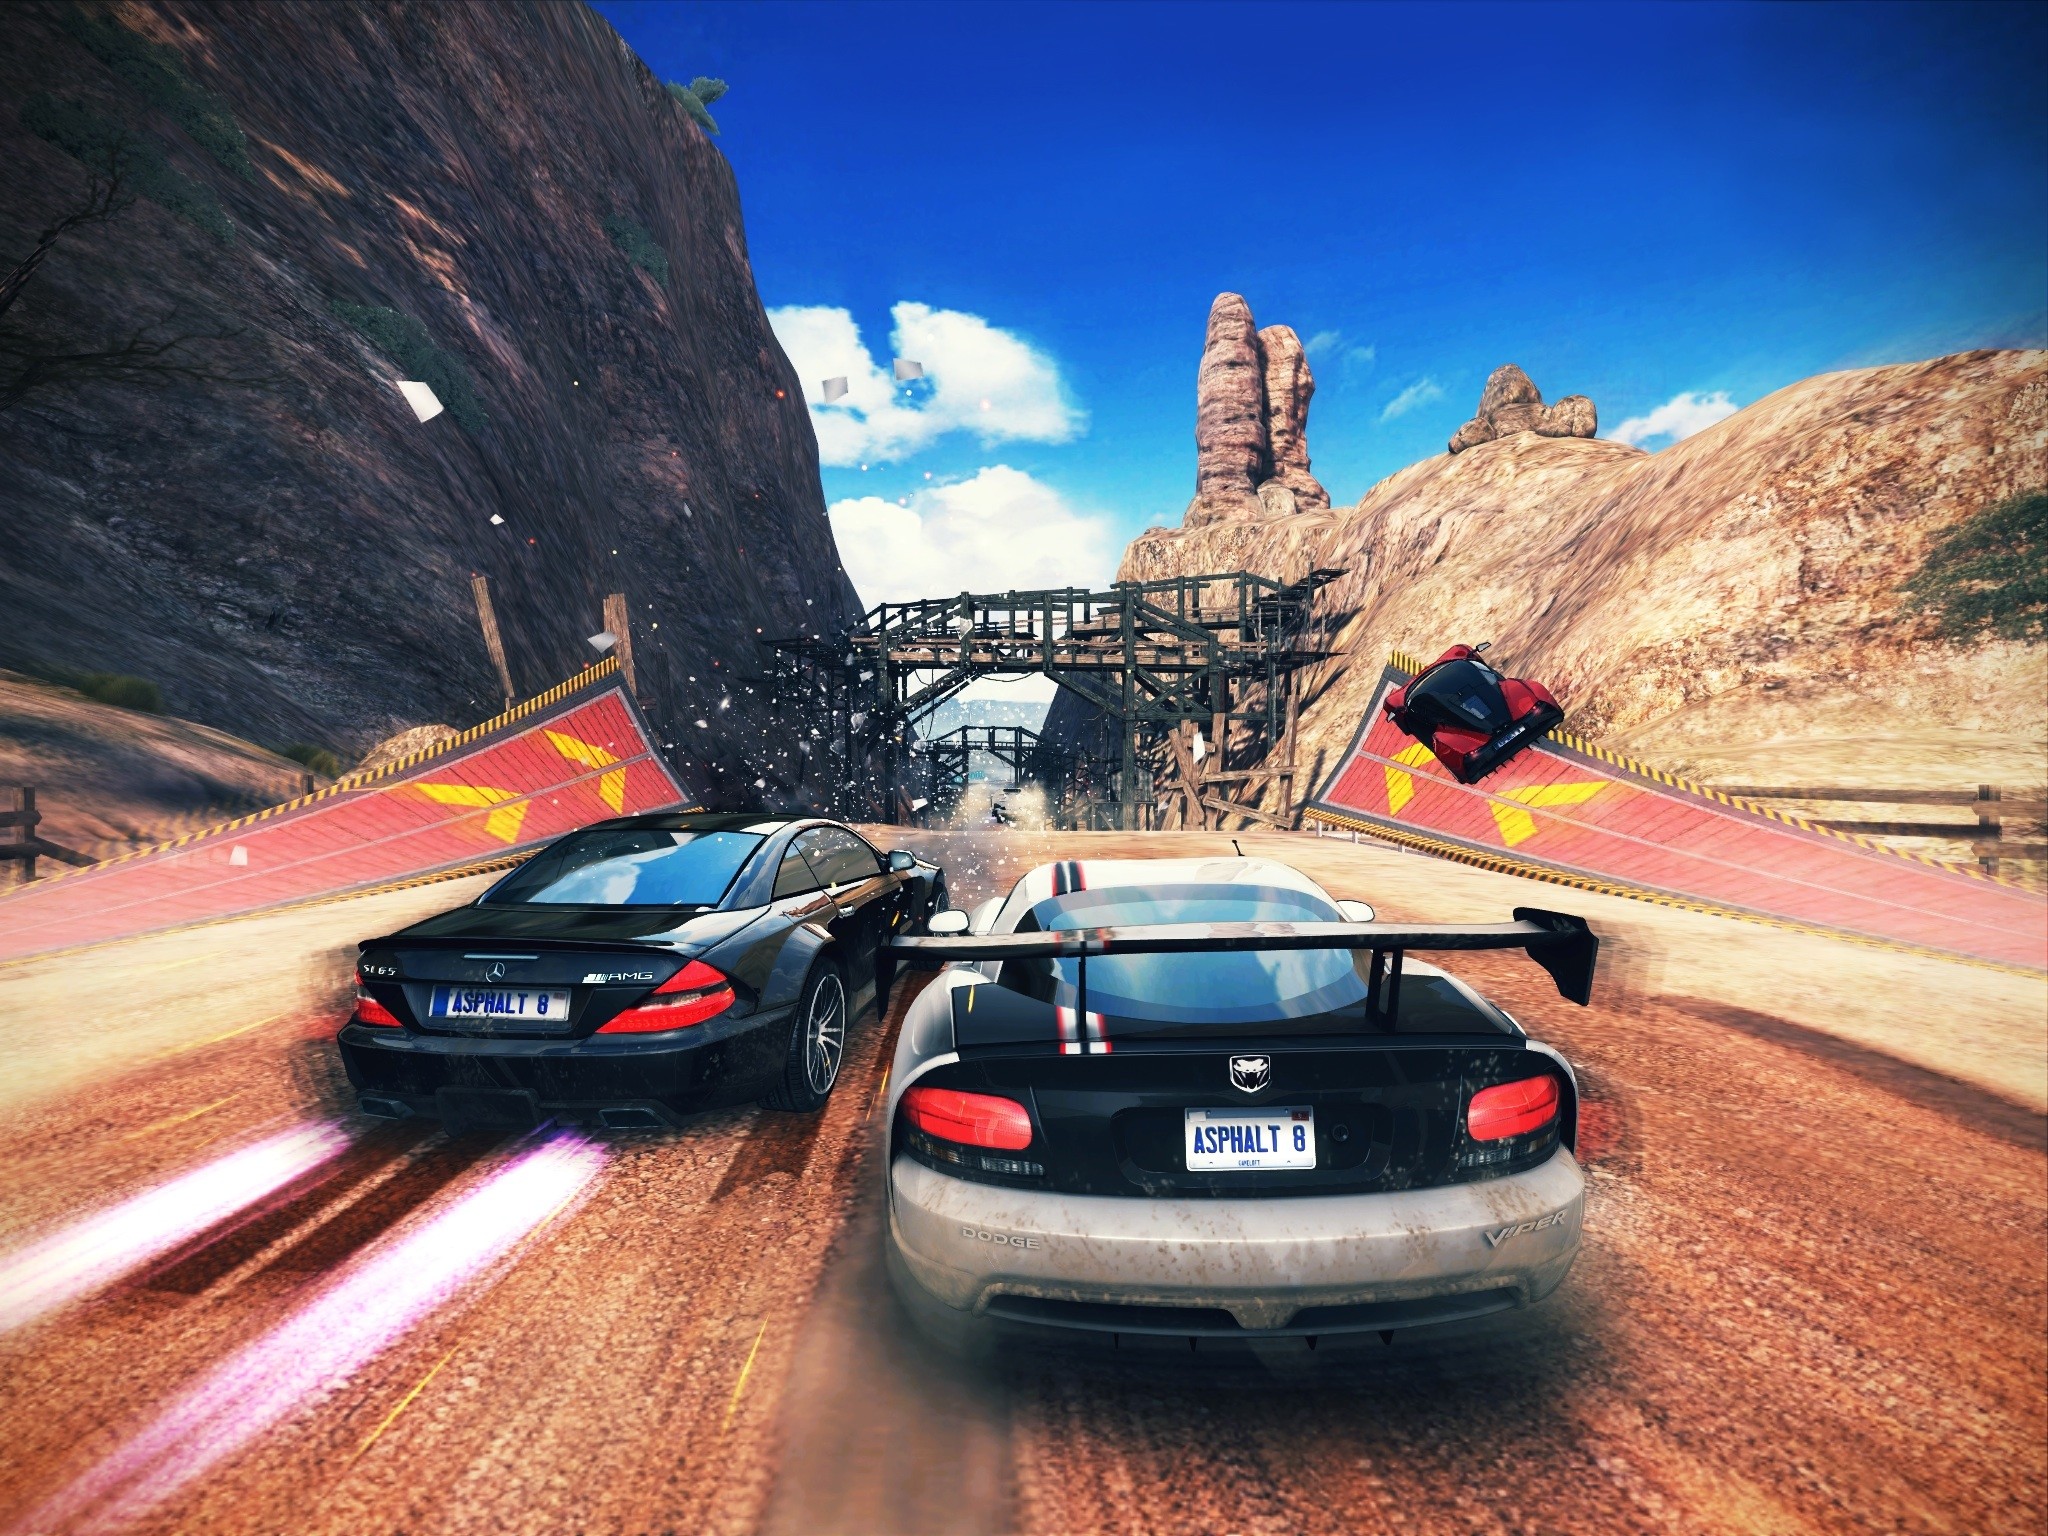 2048x1536 Asphalt 8: Airborne delayed by Gameloft as fakes hit the Play Store -  Android Community